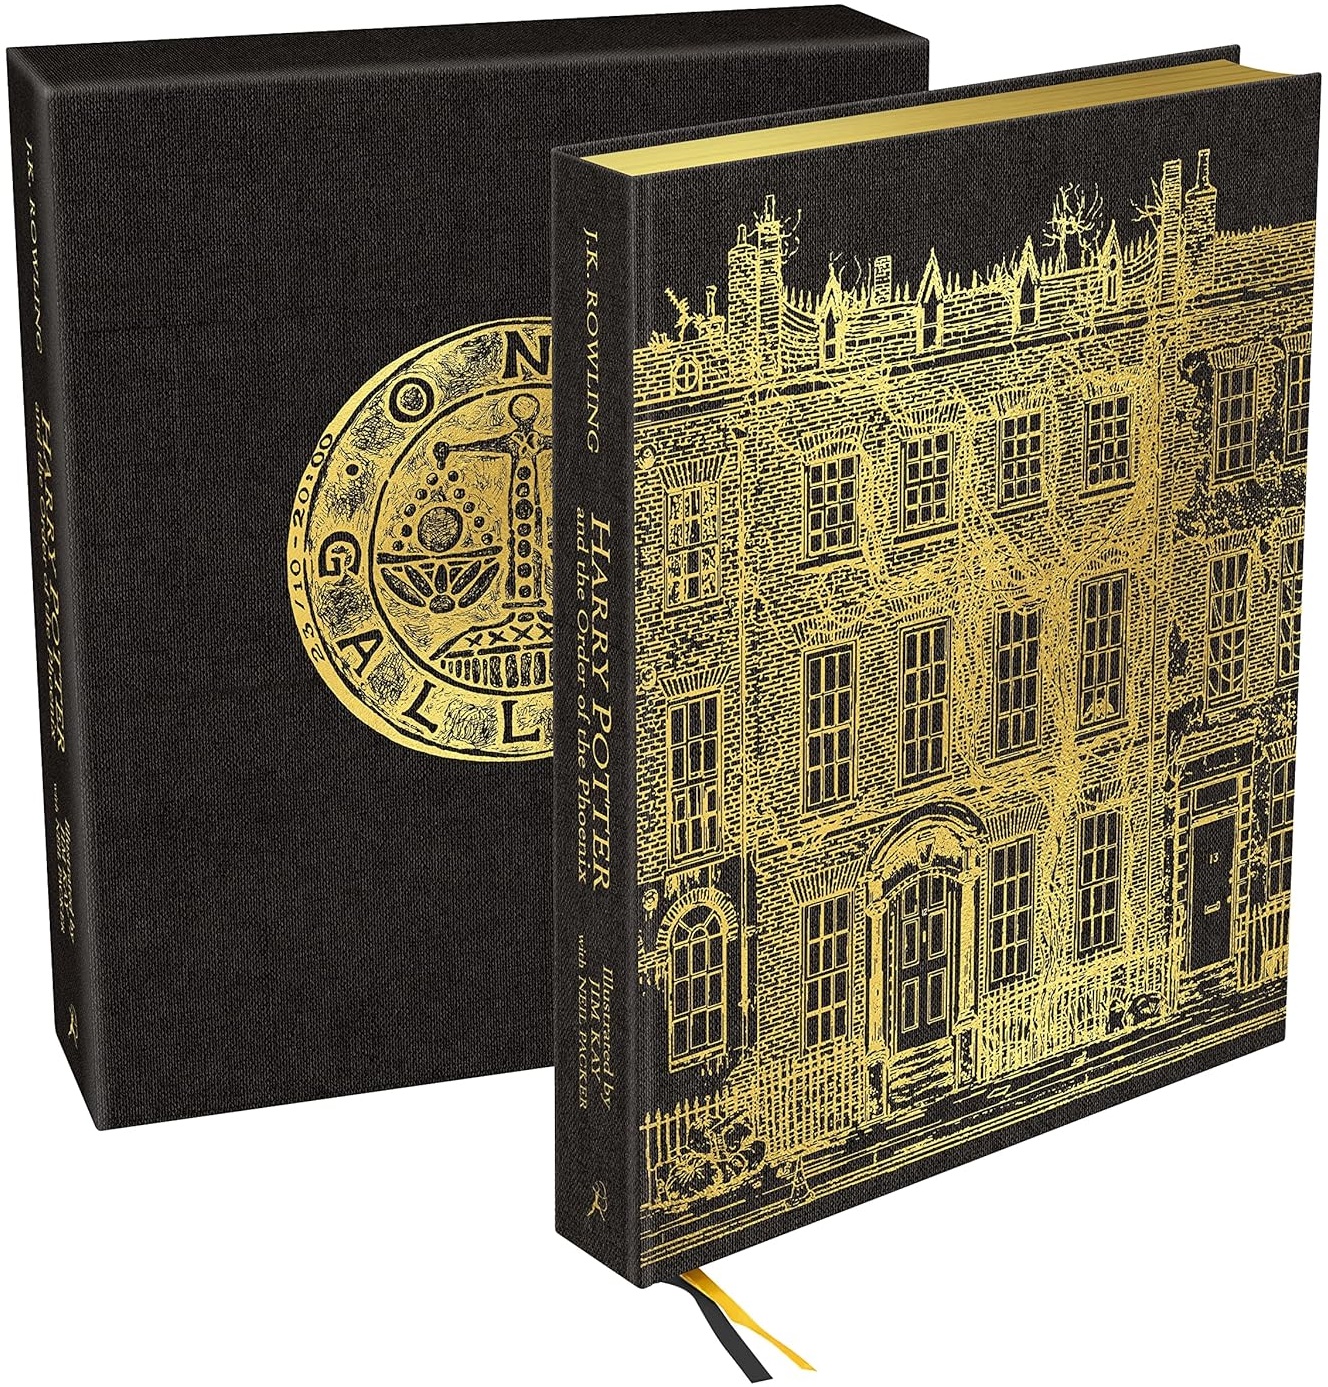 Joanne Rowling: Harry Potter and the Order of the Phoenix. Deluxe Illustrated Slipcase Edition